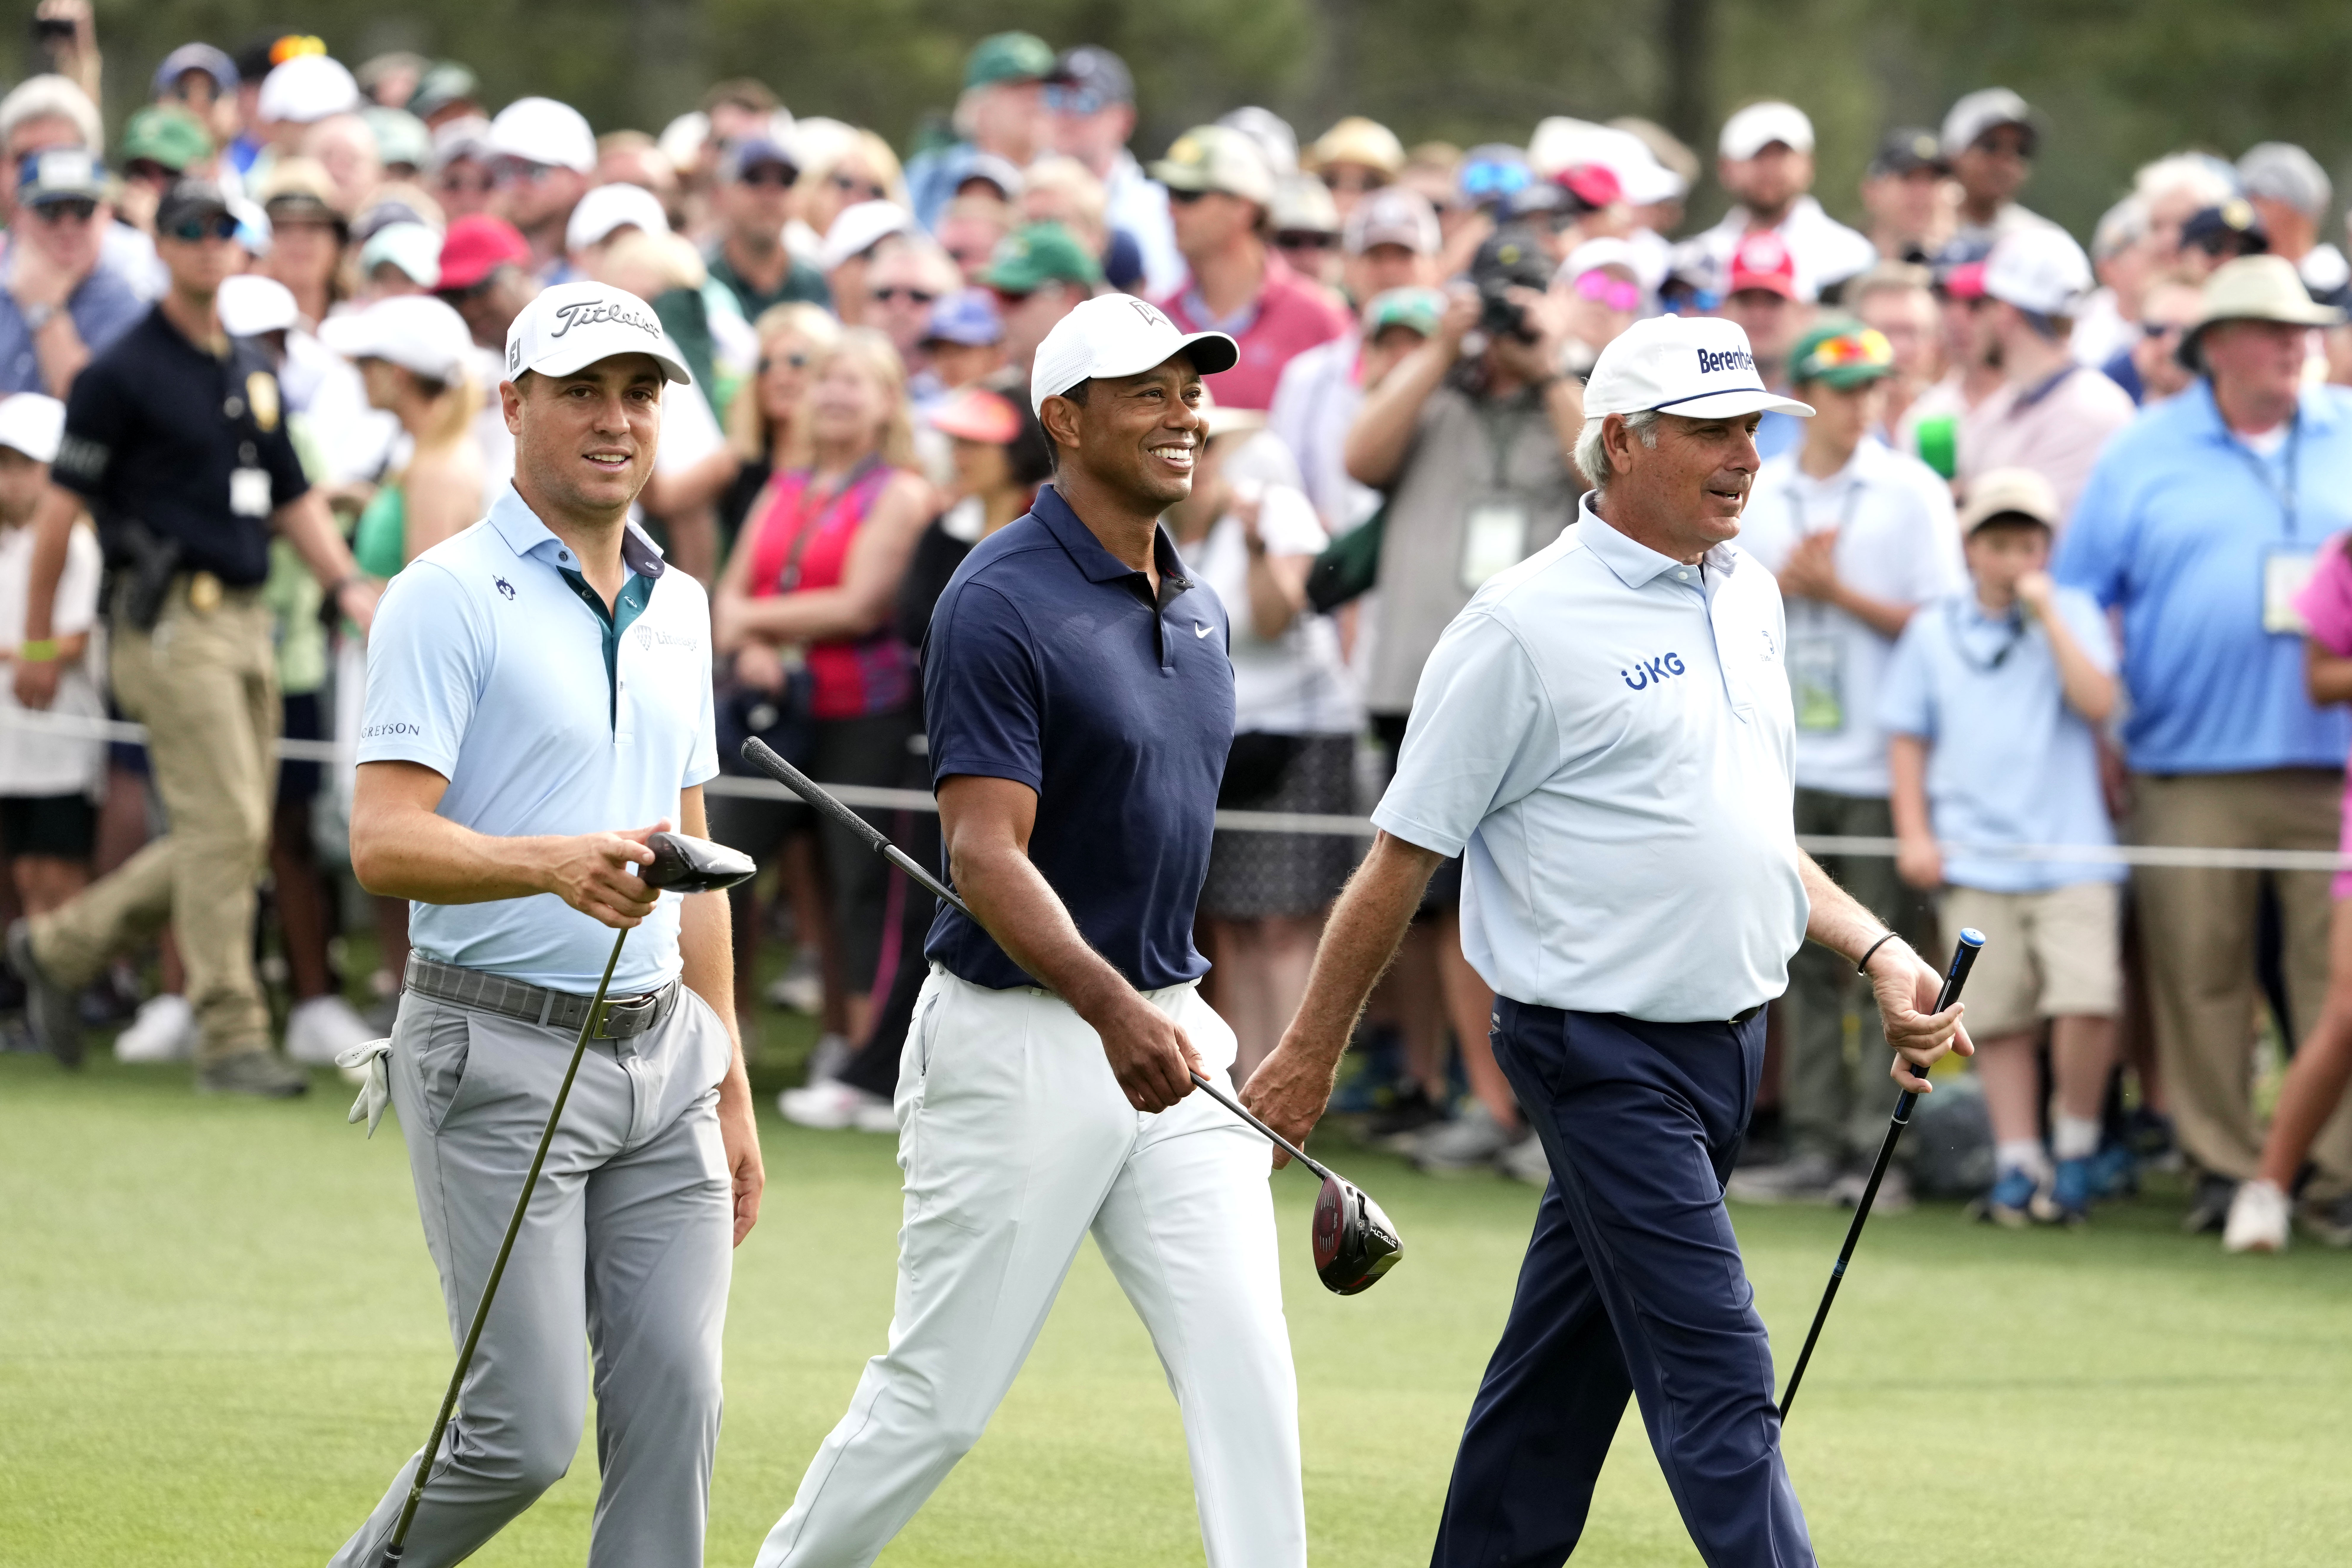 ‘If he can walk around here in 72 holes, he’ll contend’: Fred Couples after Masters practice round with Tiger Woods